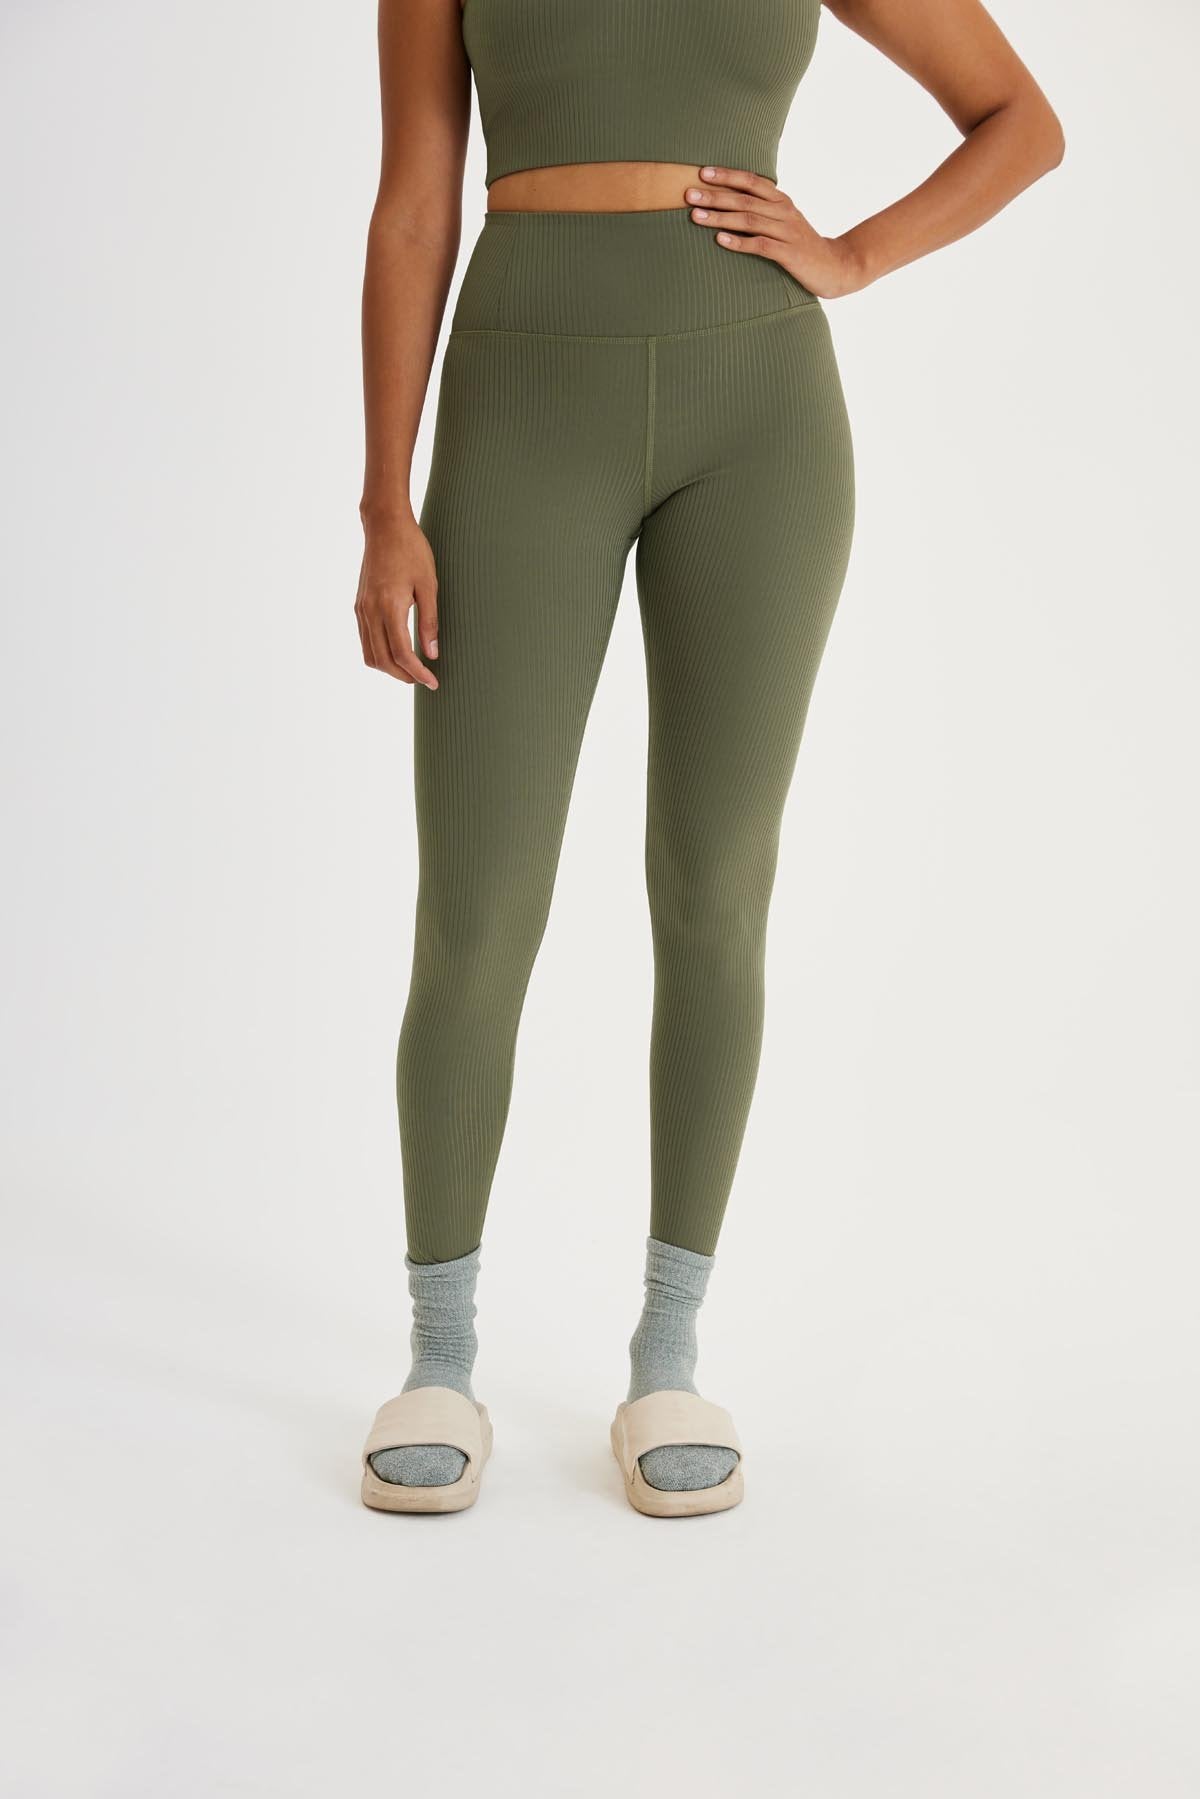 Shelby Textured Star High Waisted Leggings - Sea Green - Eleven